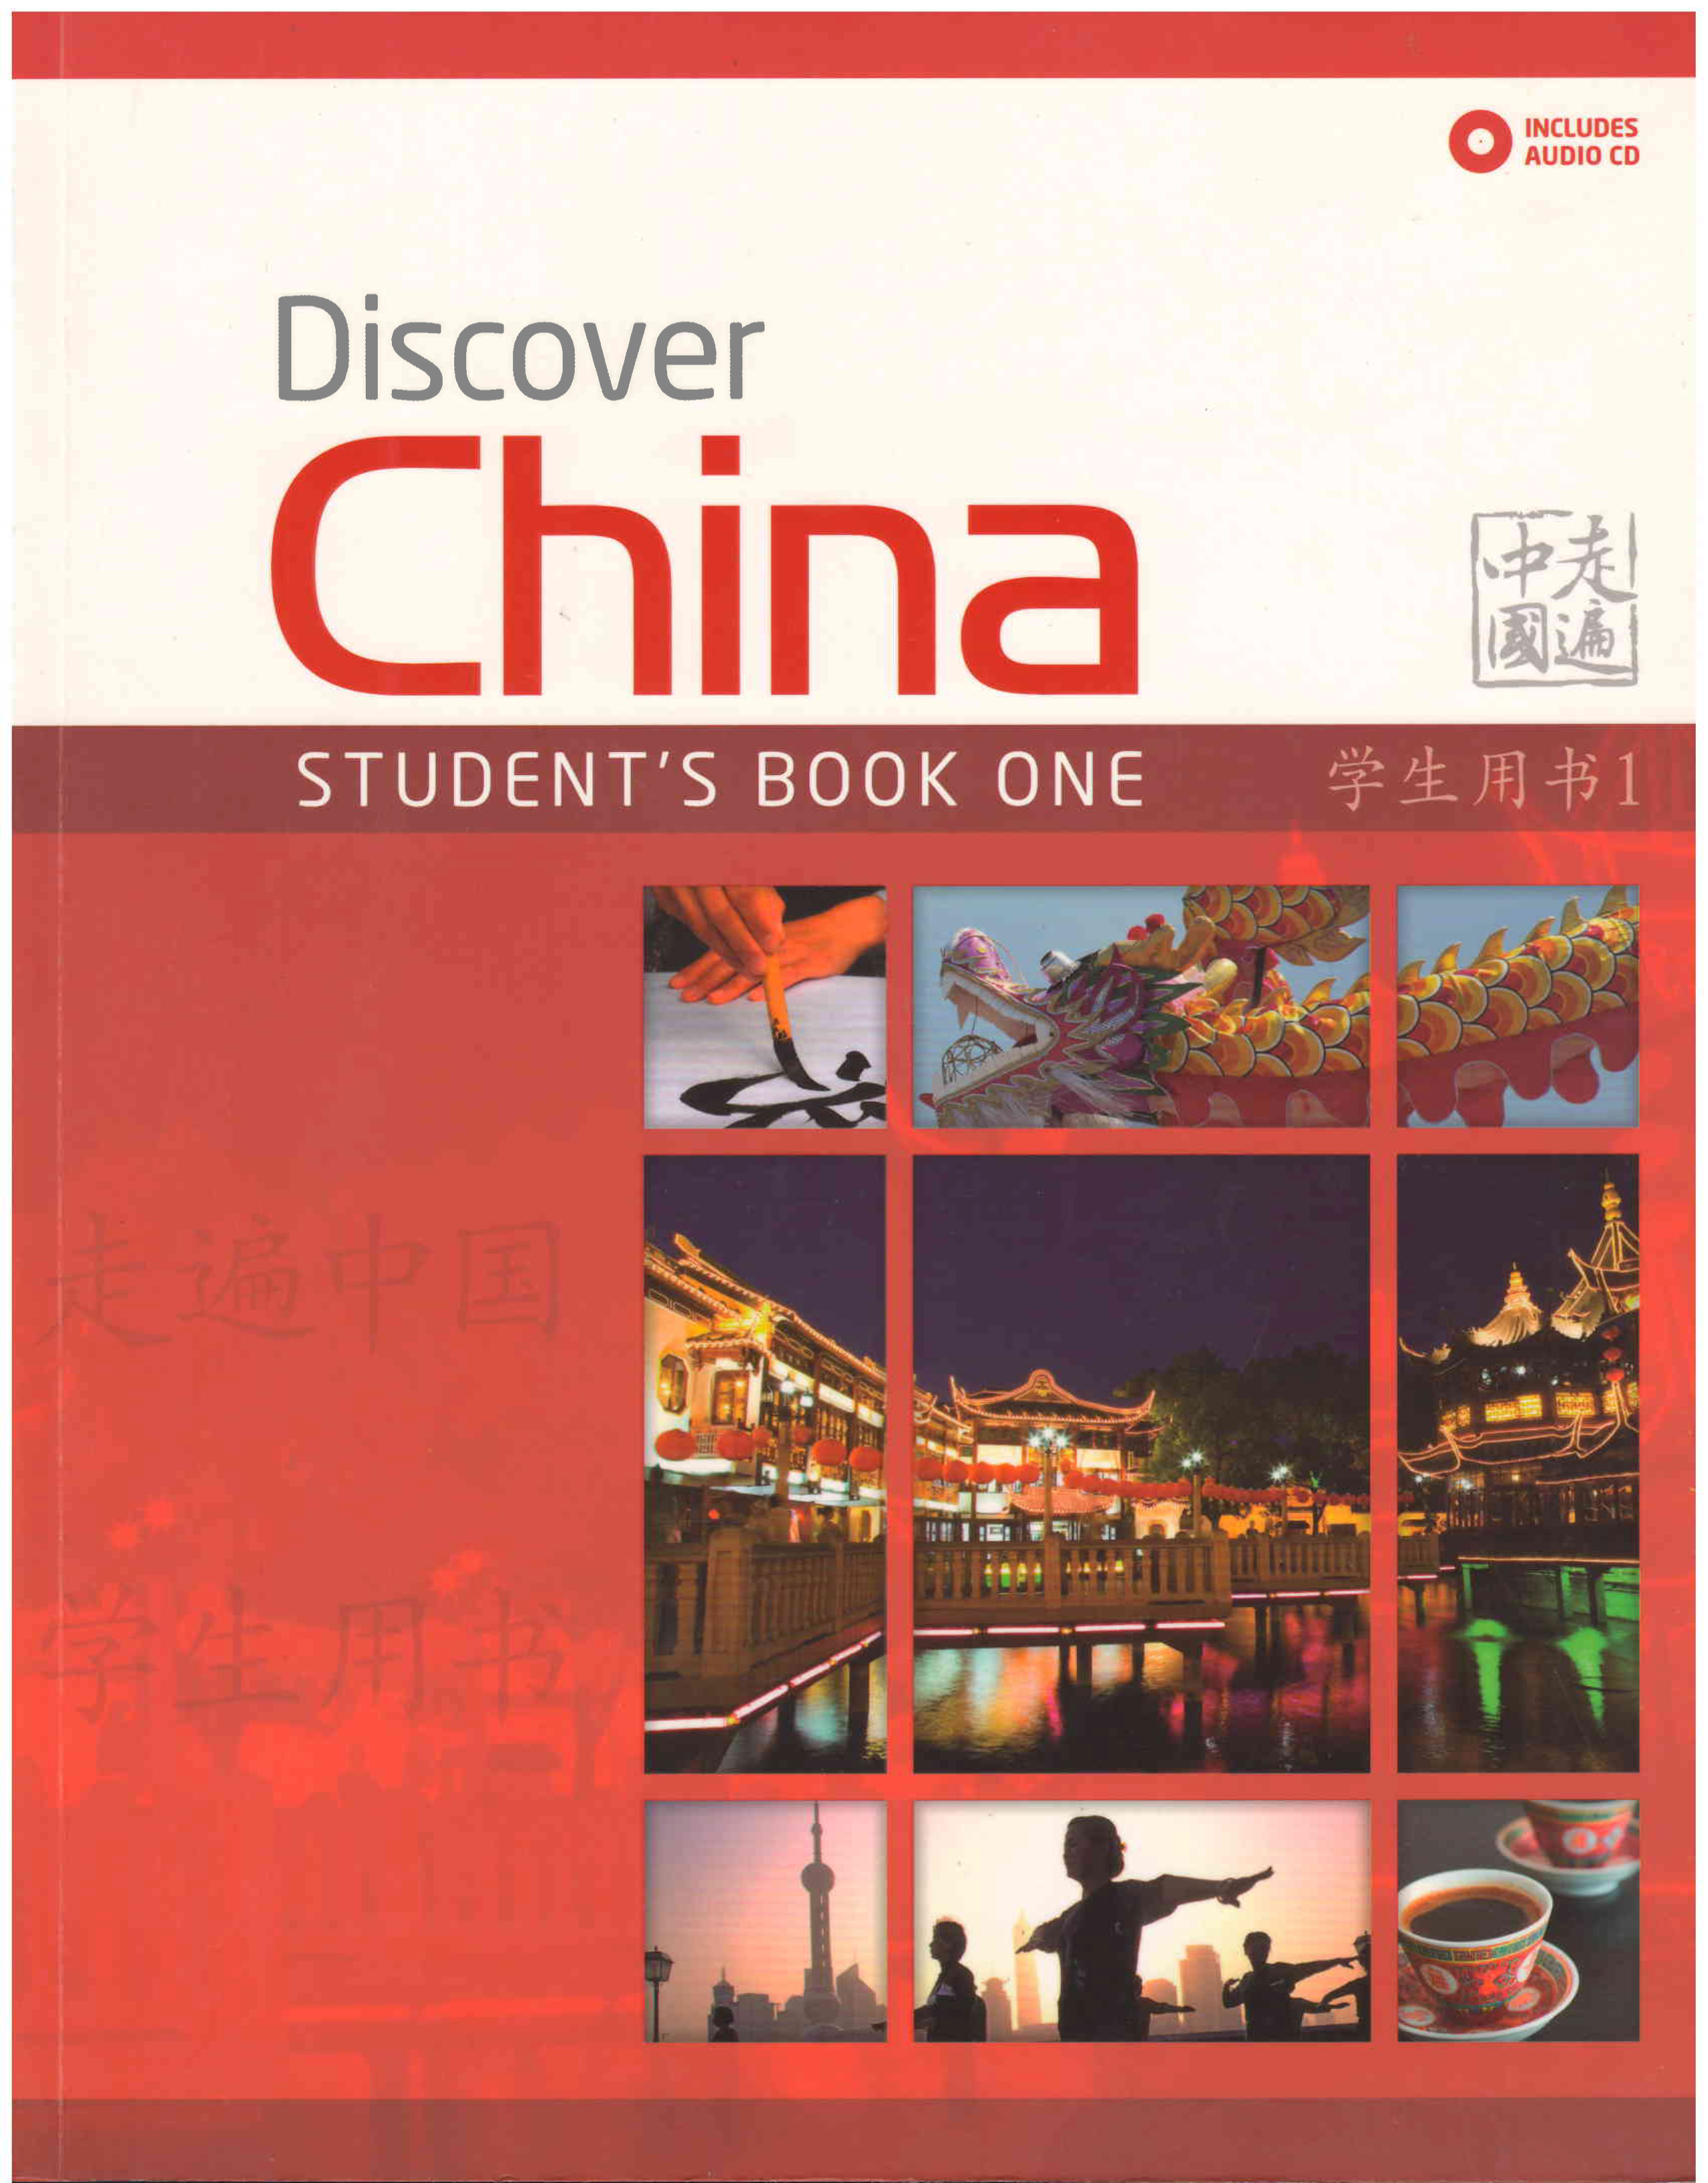 Discover students book. Discover China учебник. Discover China 1. Discover China student book. Discover.